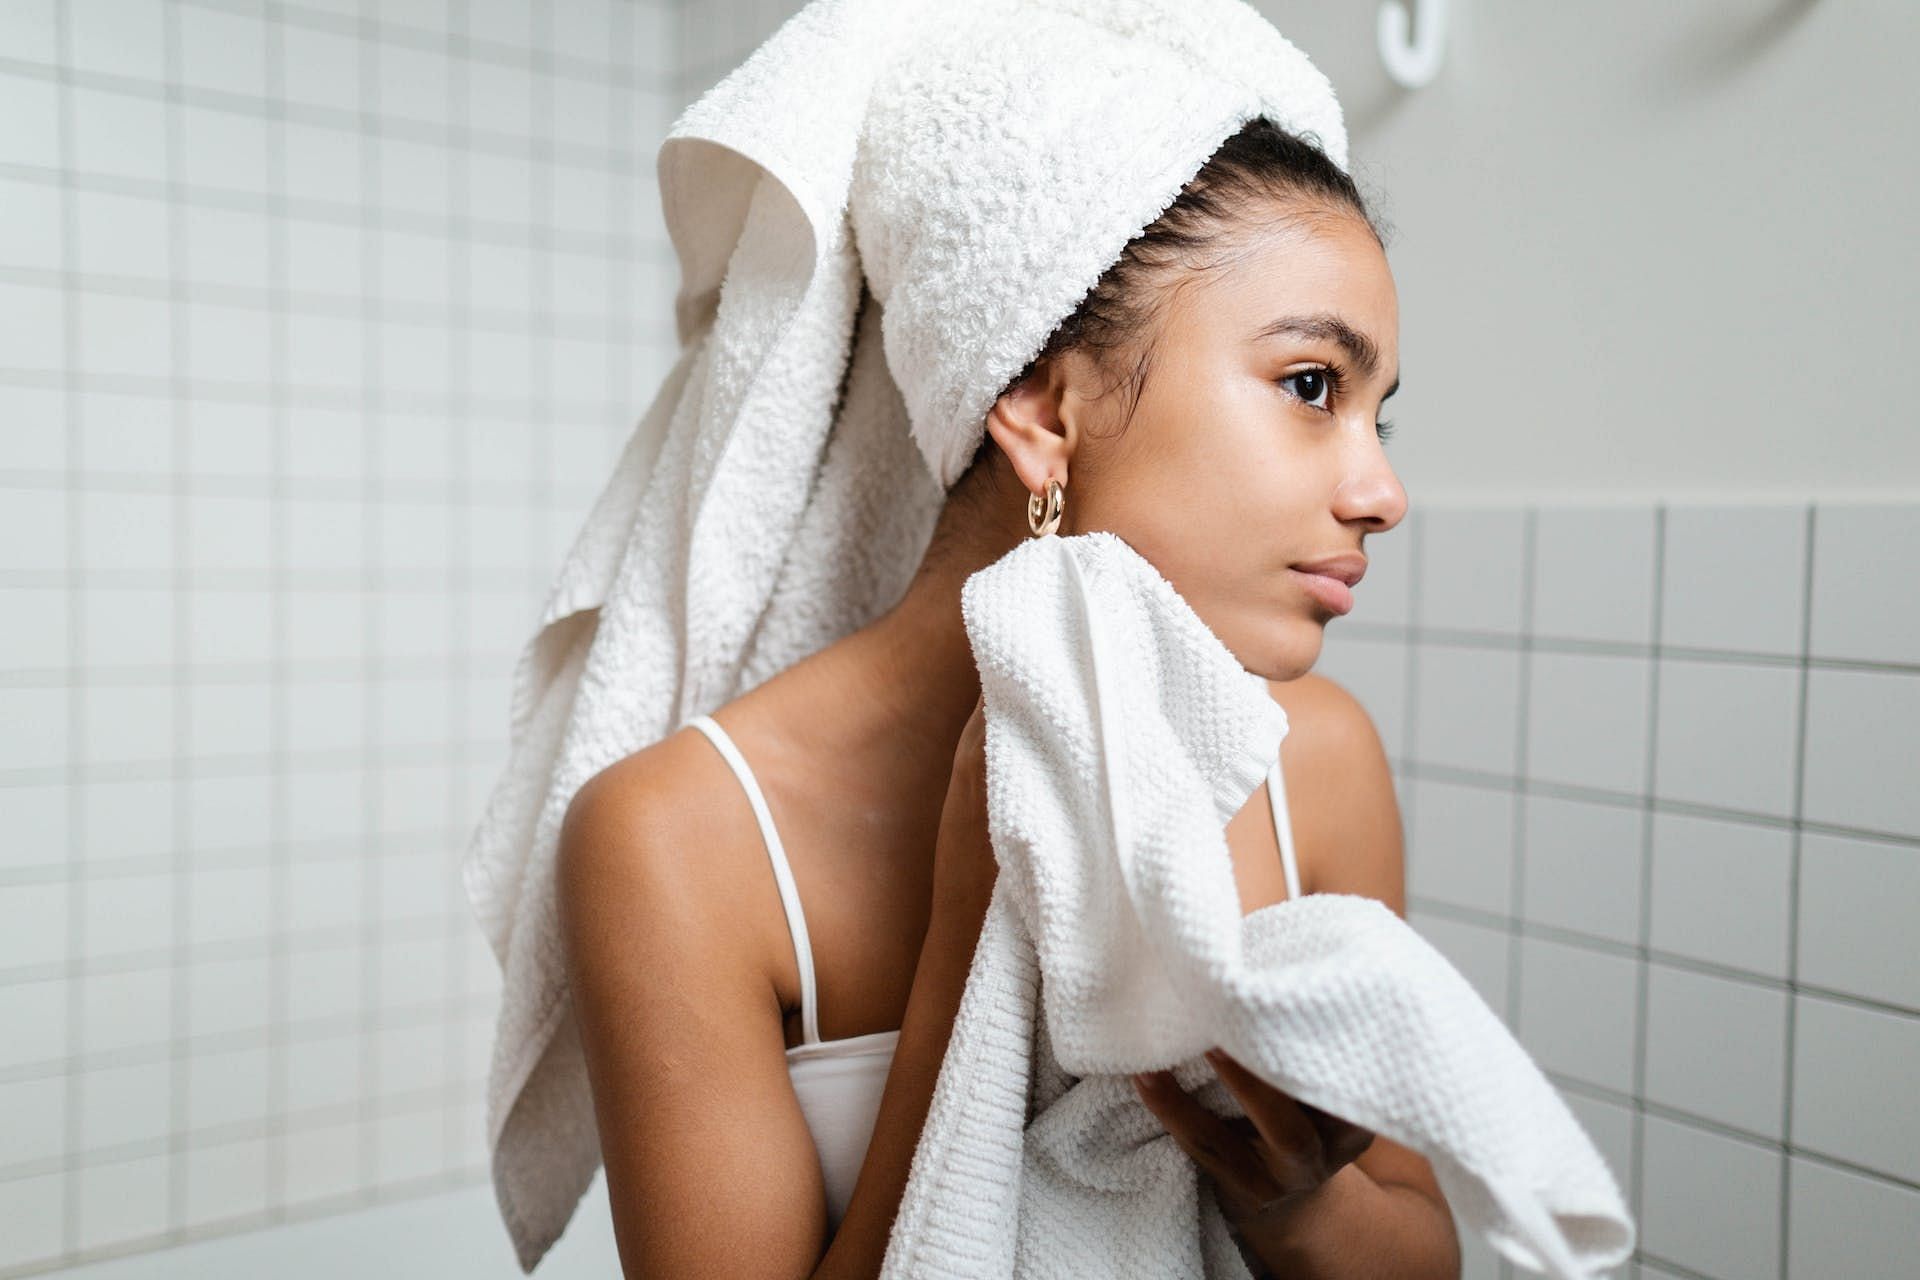 Shower can boost your skin health. (Image via Pexels/Ron Lach)